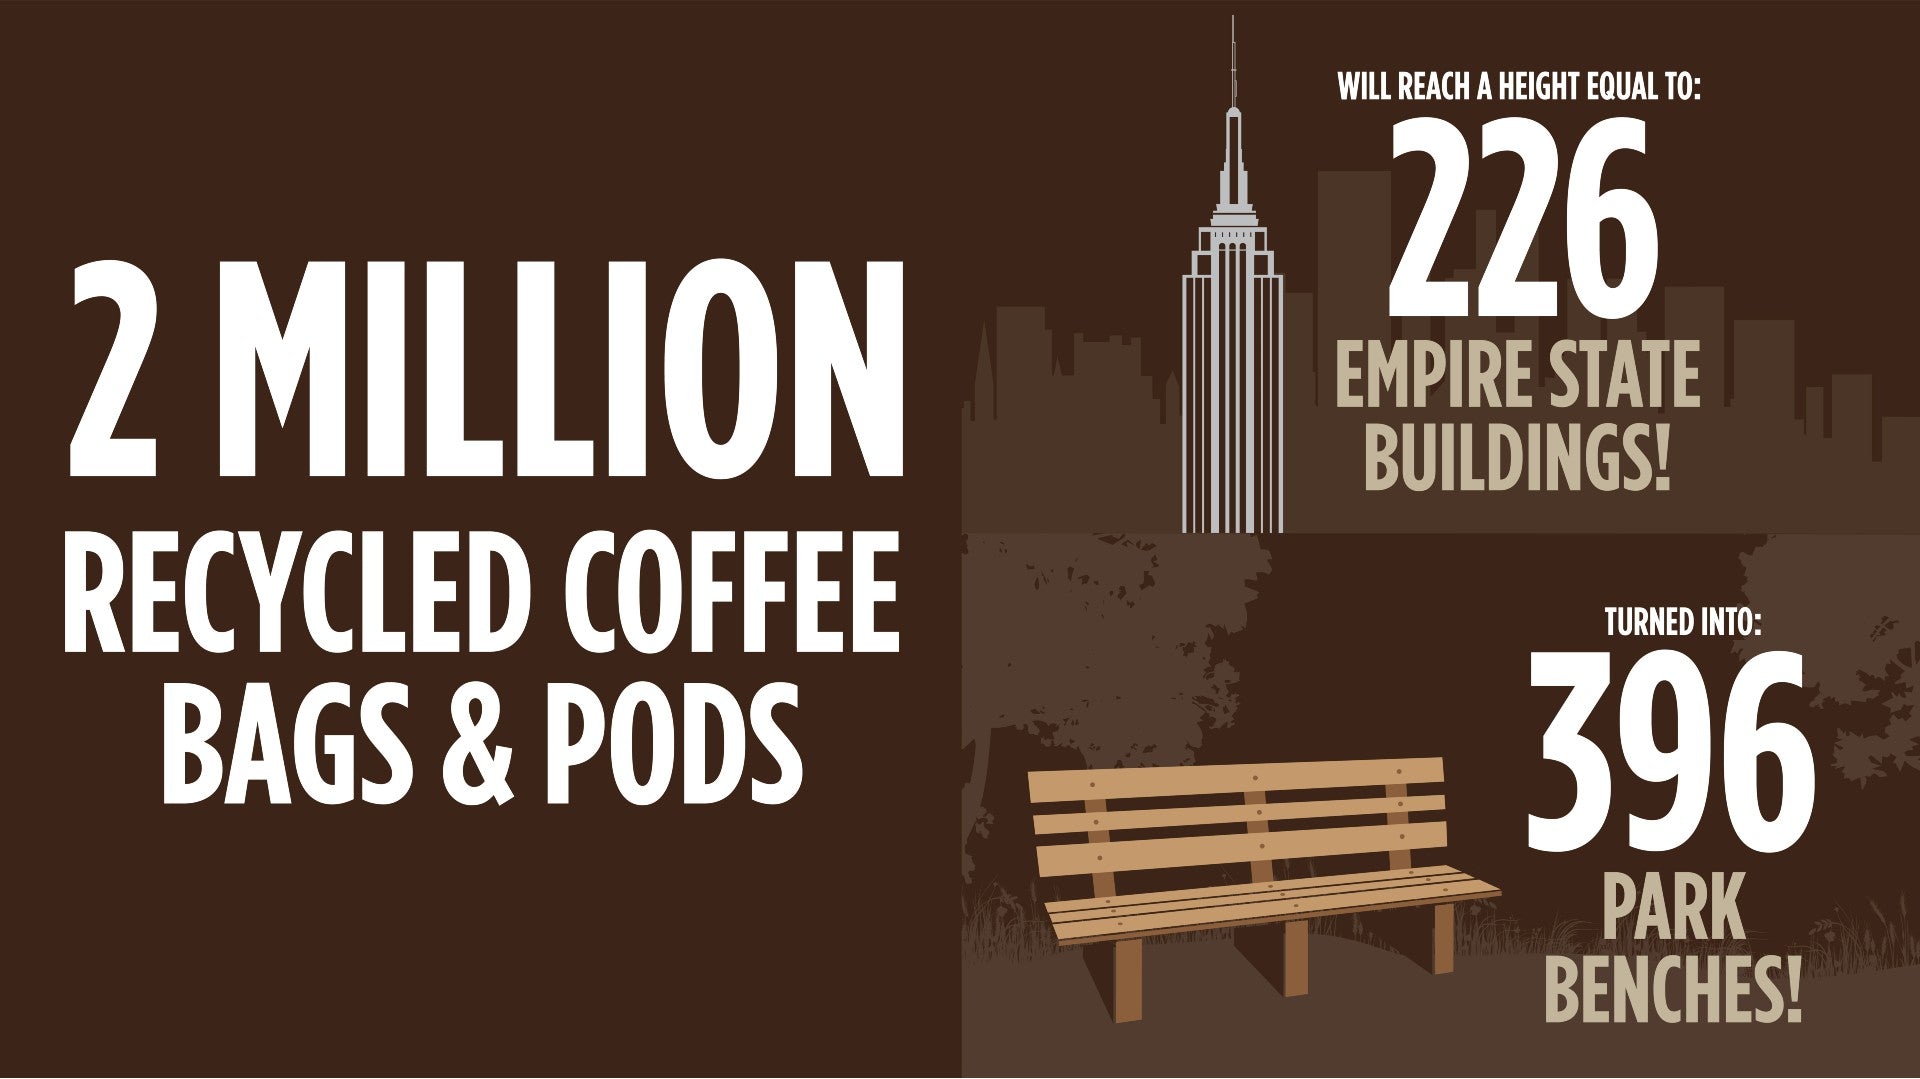 Don Francisco's Coffee - 2 Million Recycled Coffee Bags and Pods.